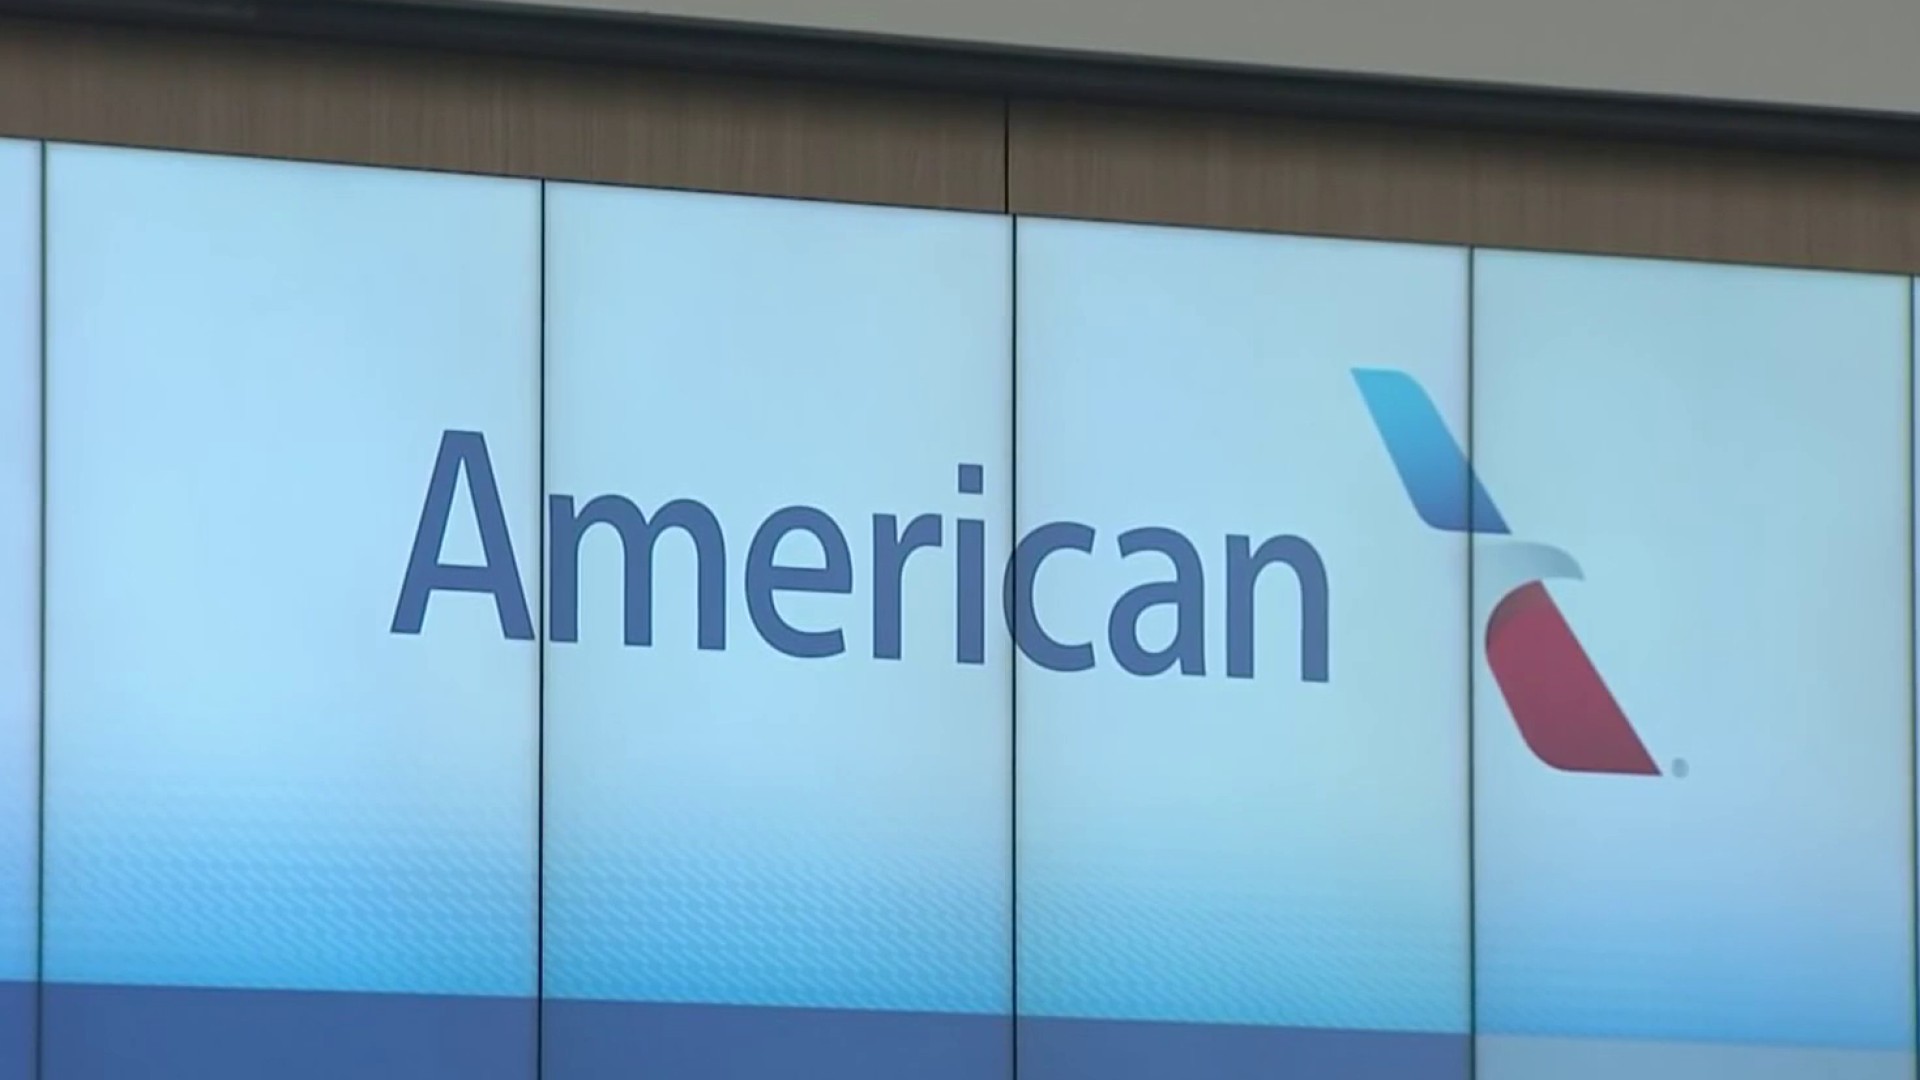 Busty Model Claims She Was Thrown Off American Airlines Flight For Her  Explicit Figure, Not Being Drunk - Live and Let's Fly